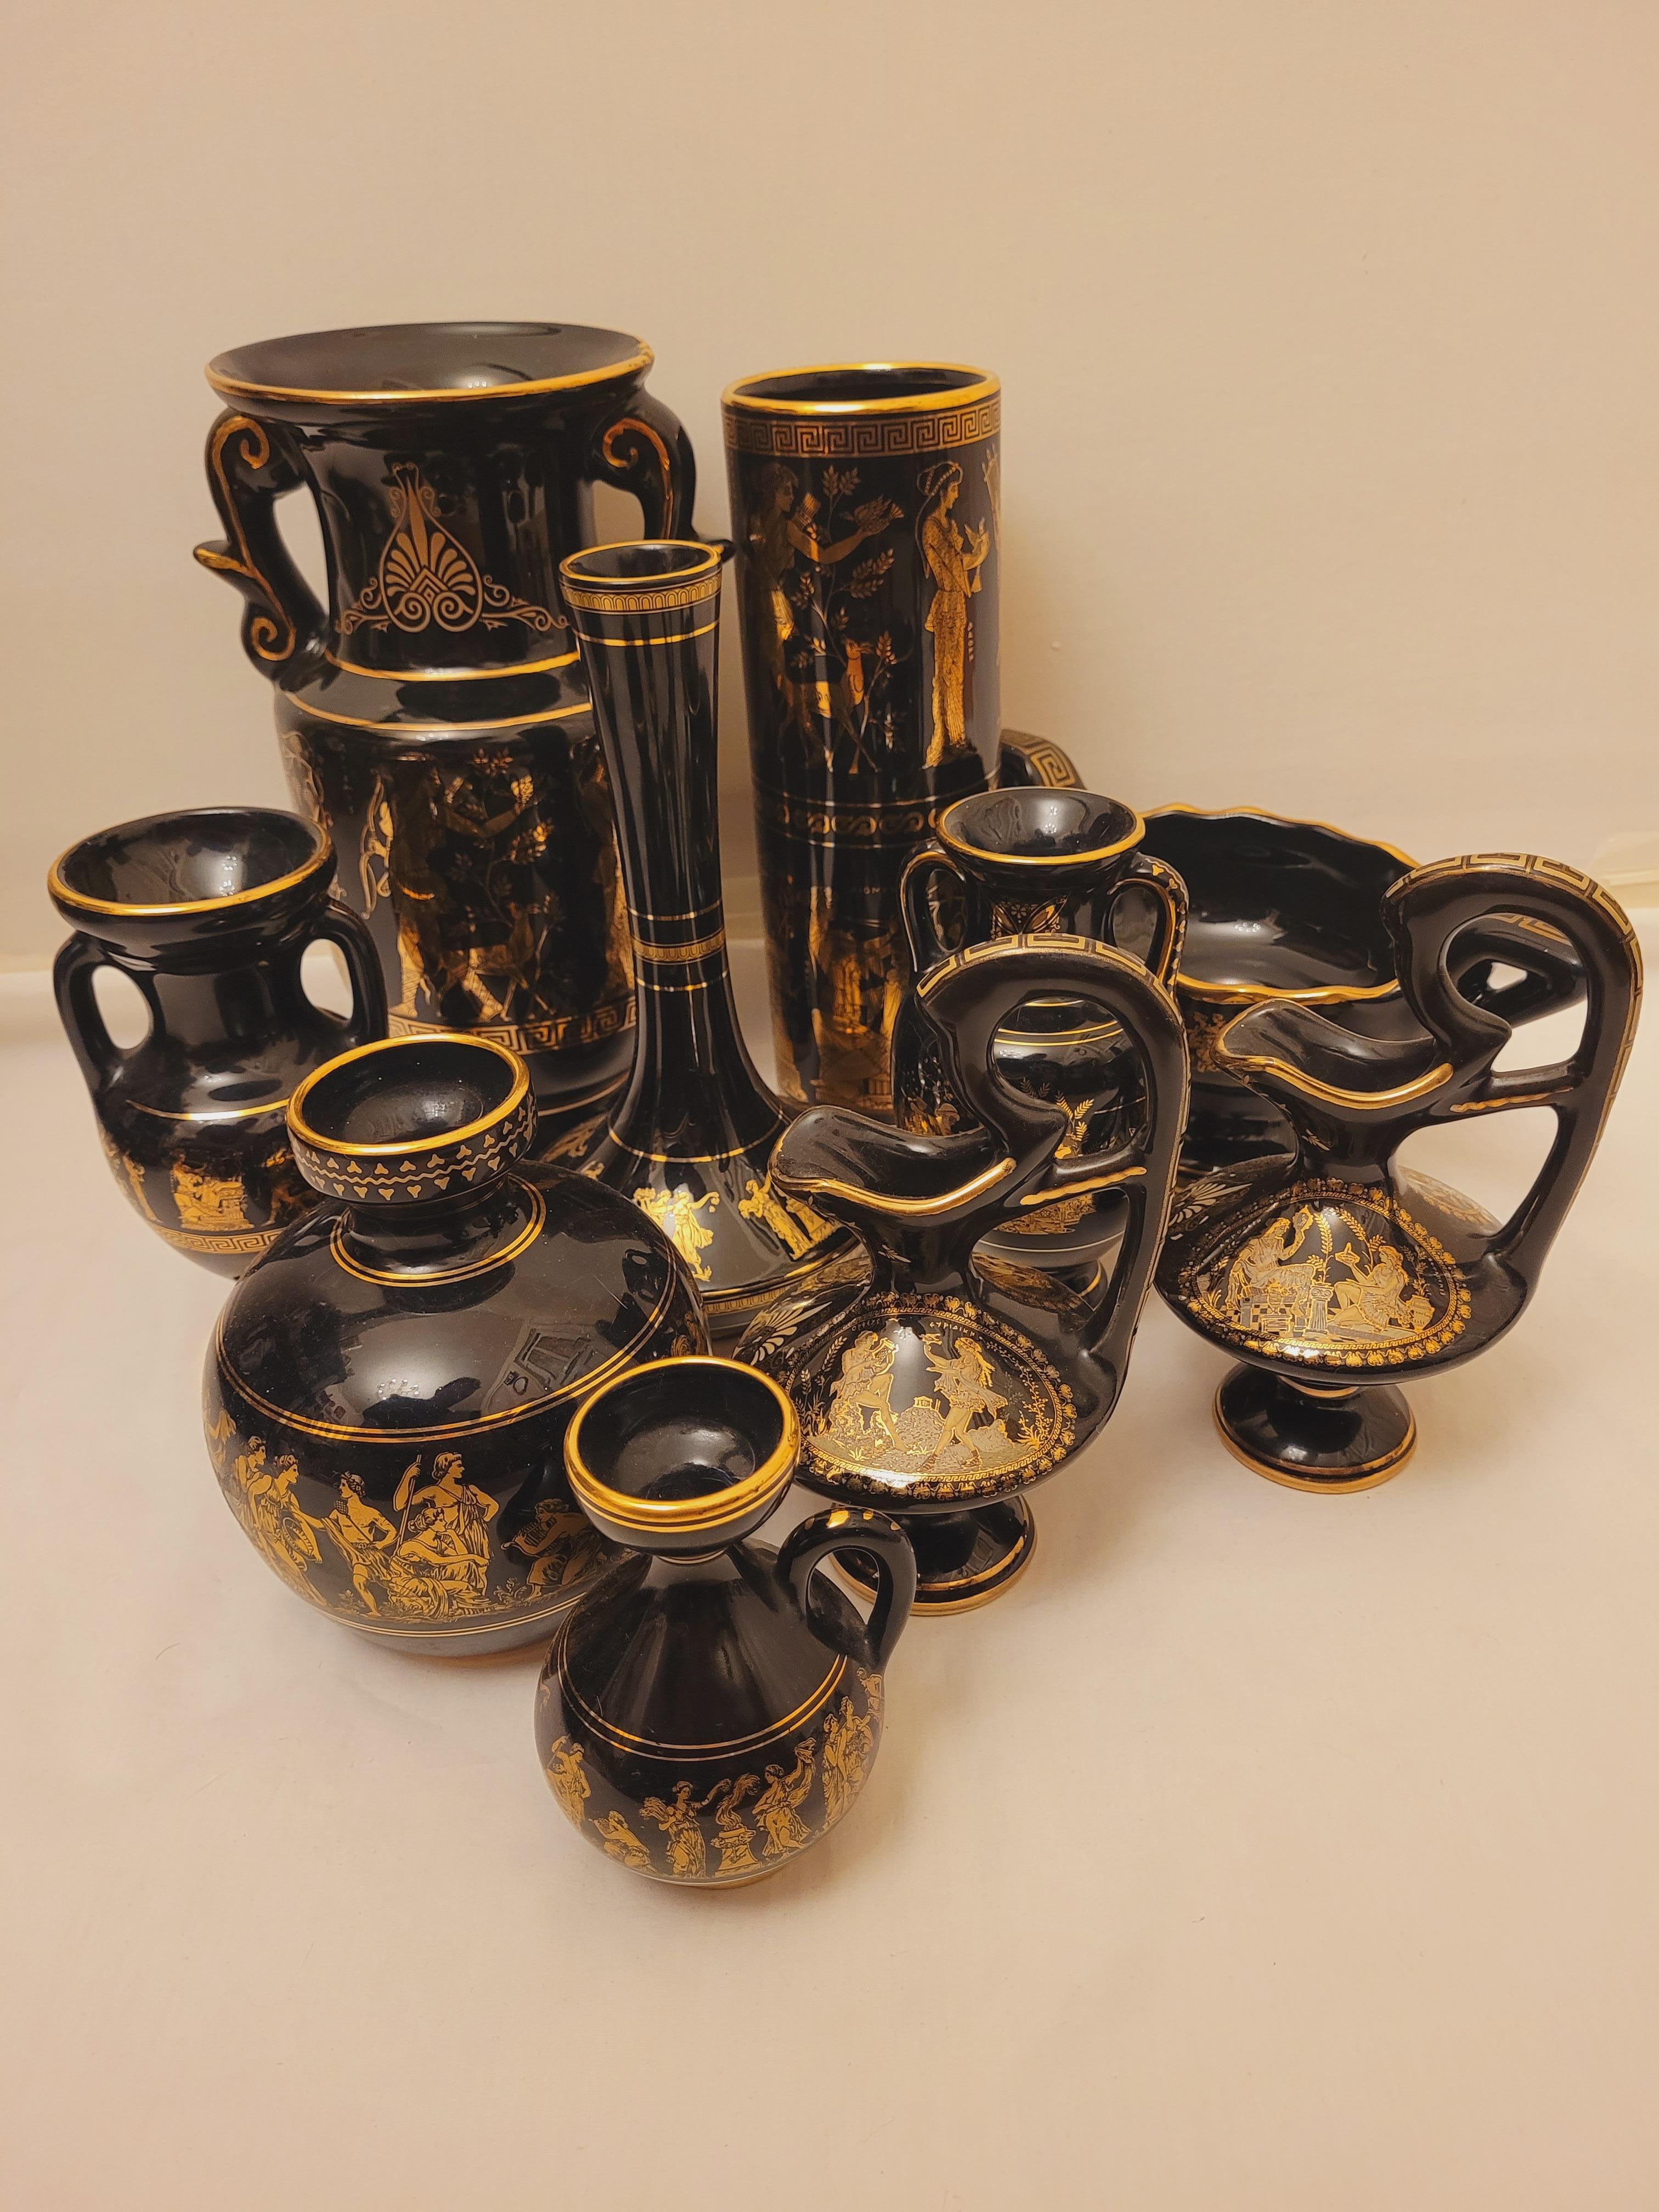 Beautiful hand made ceramic art made in Greece years; 1950-1960.
Set of nine vases, one bowl and one plate. The vases are 15cm, 15cm, 22cm, 24cm, 26cm tall; the bowl is 23cm and the plate is 22cm wide. In excellent condition.